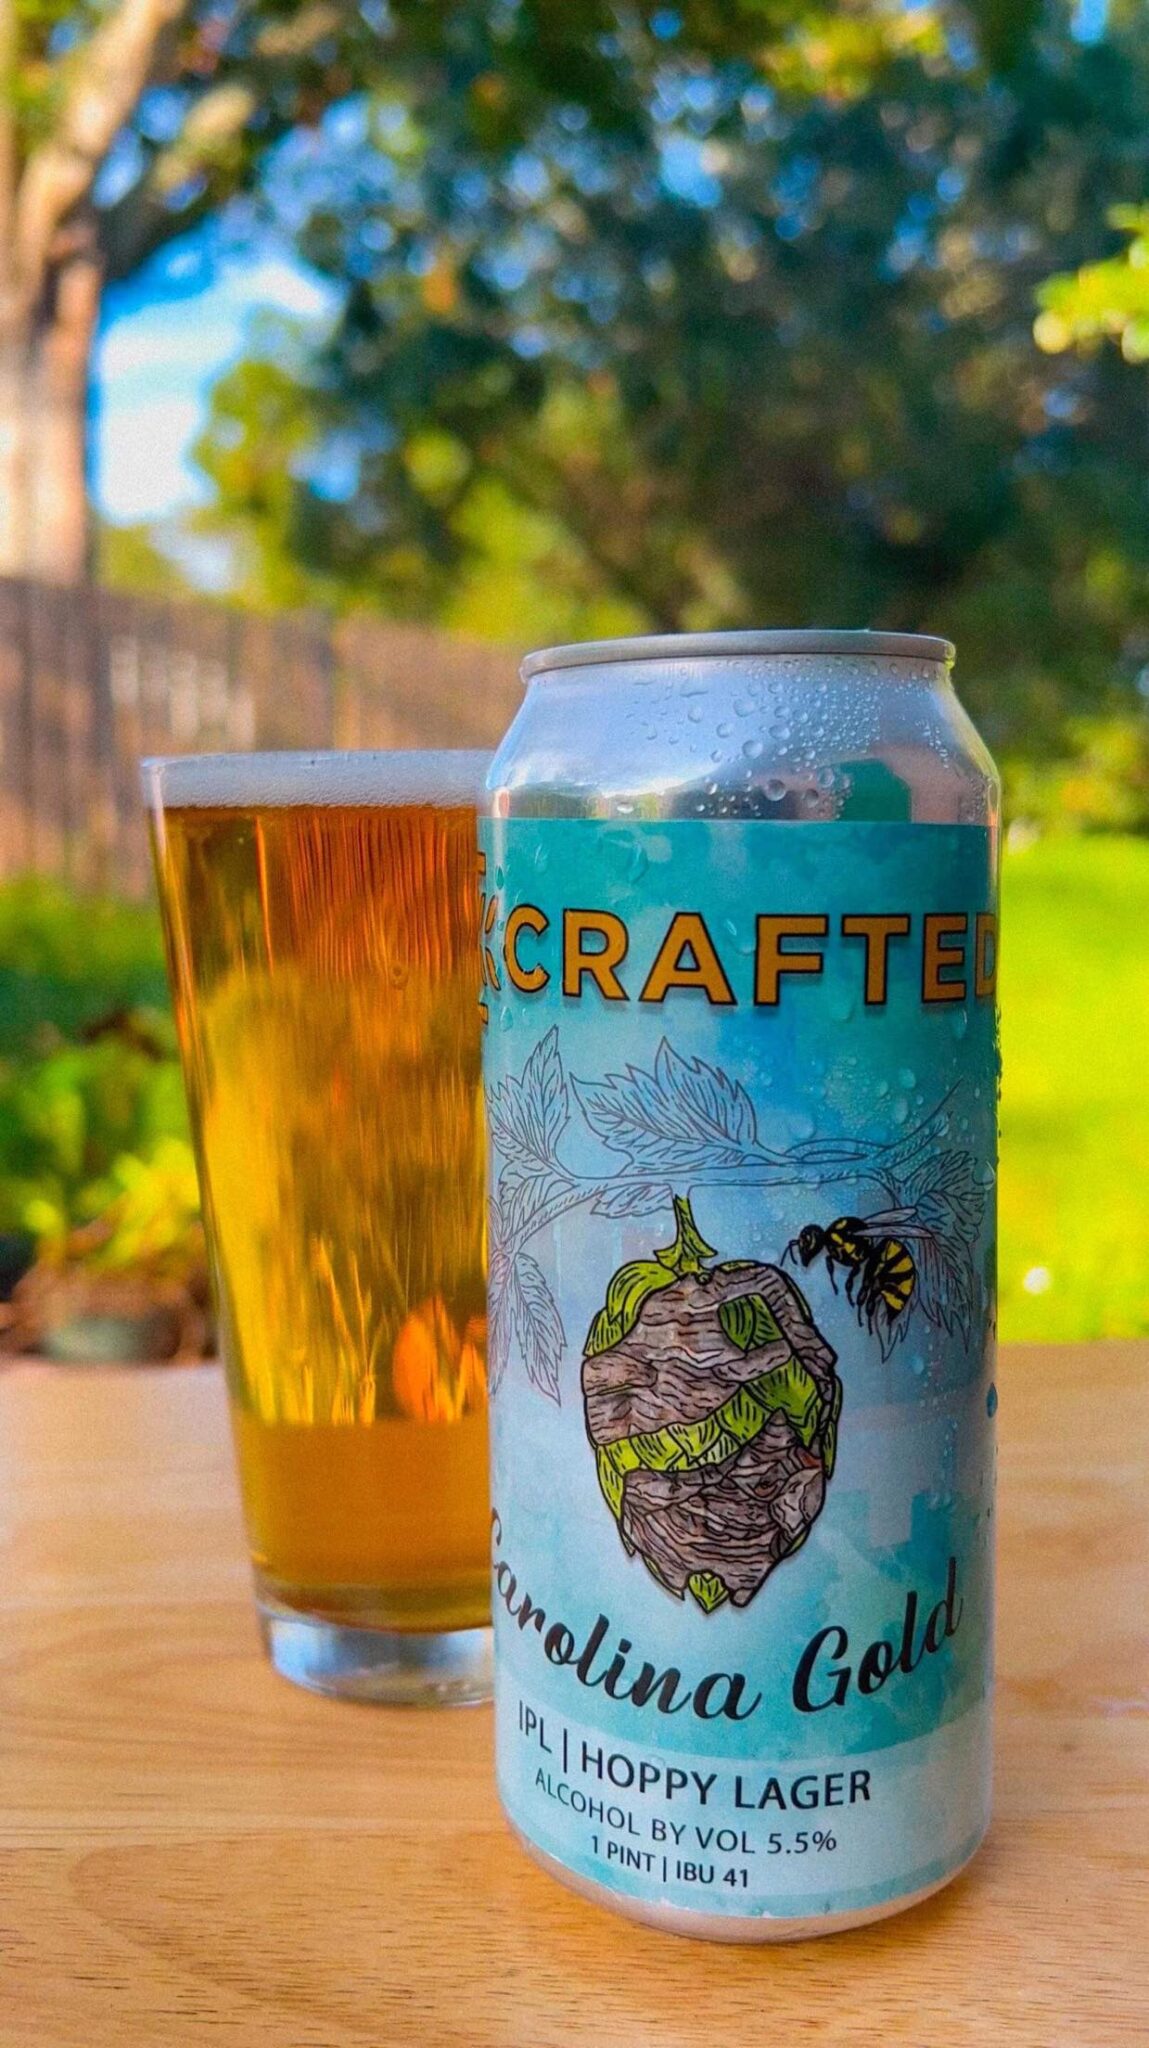 India Pale Lager by Crafted craft beer